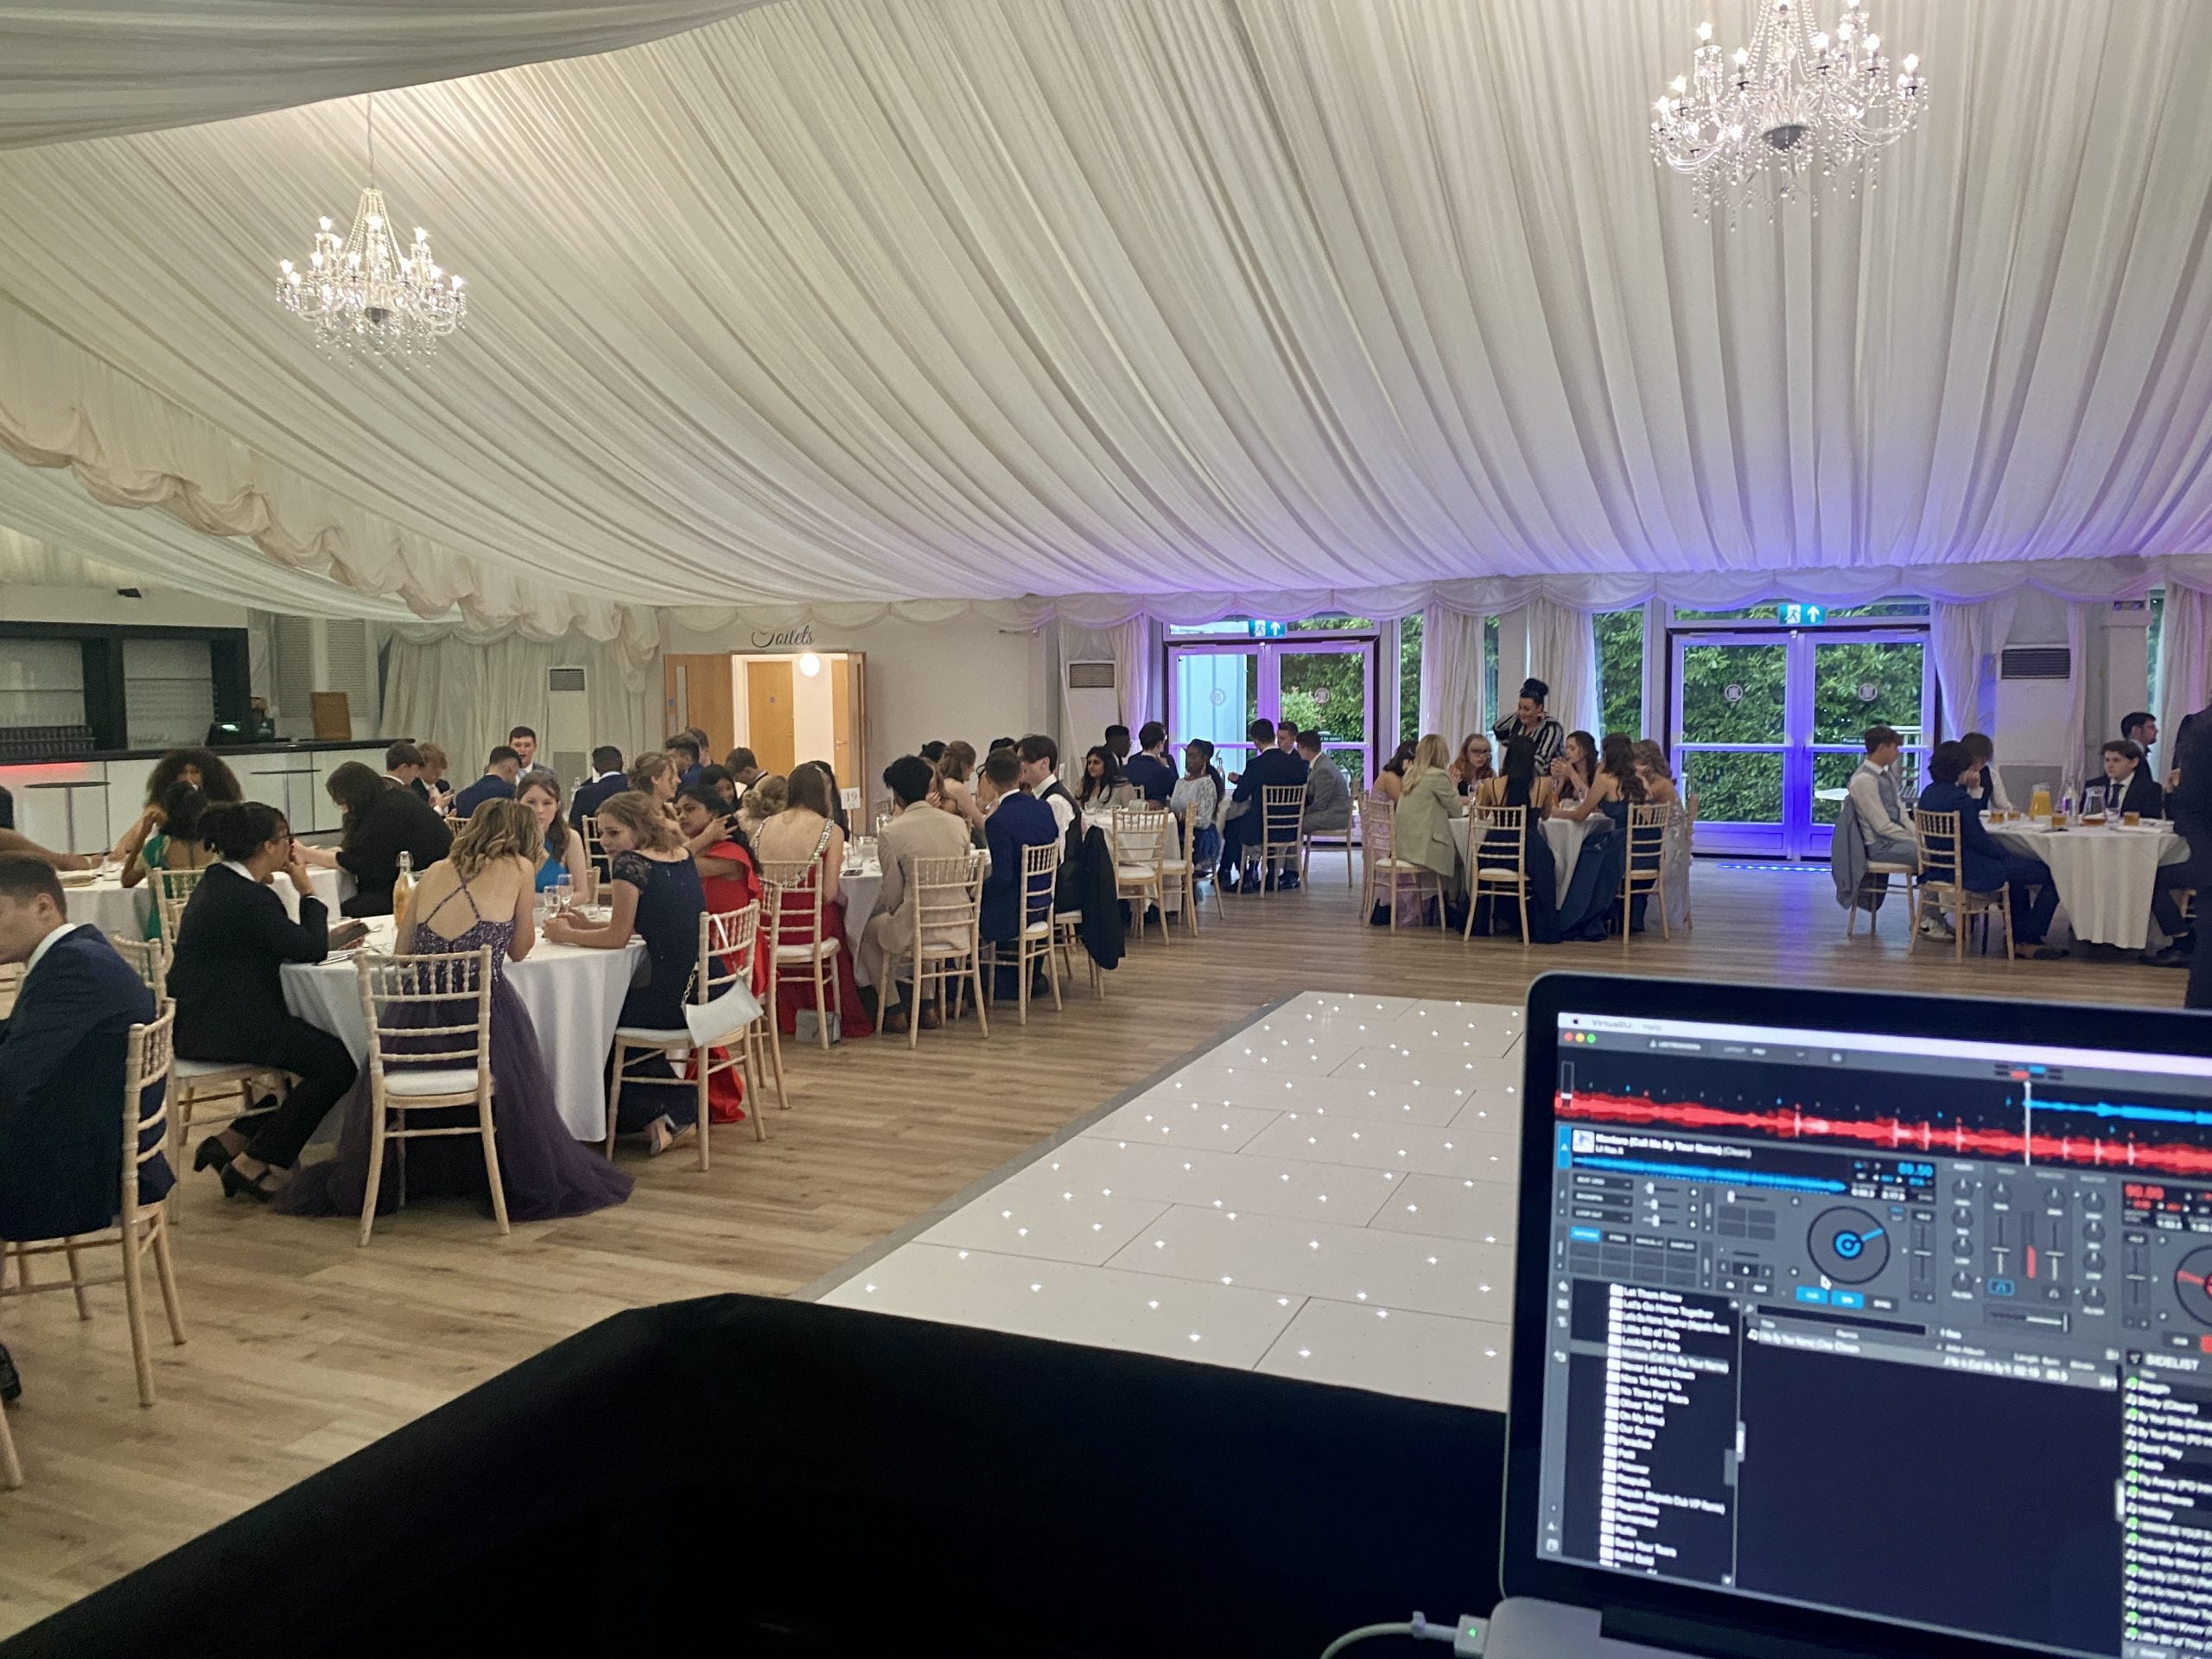 Make Your Wedding Unforgettable With The Best Wedding Entertainment